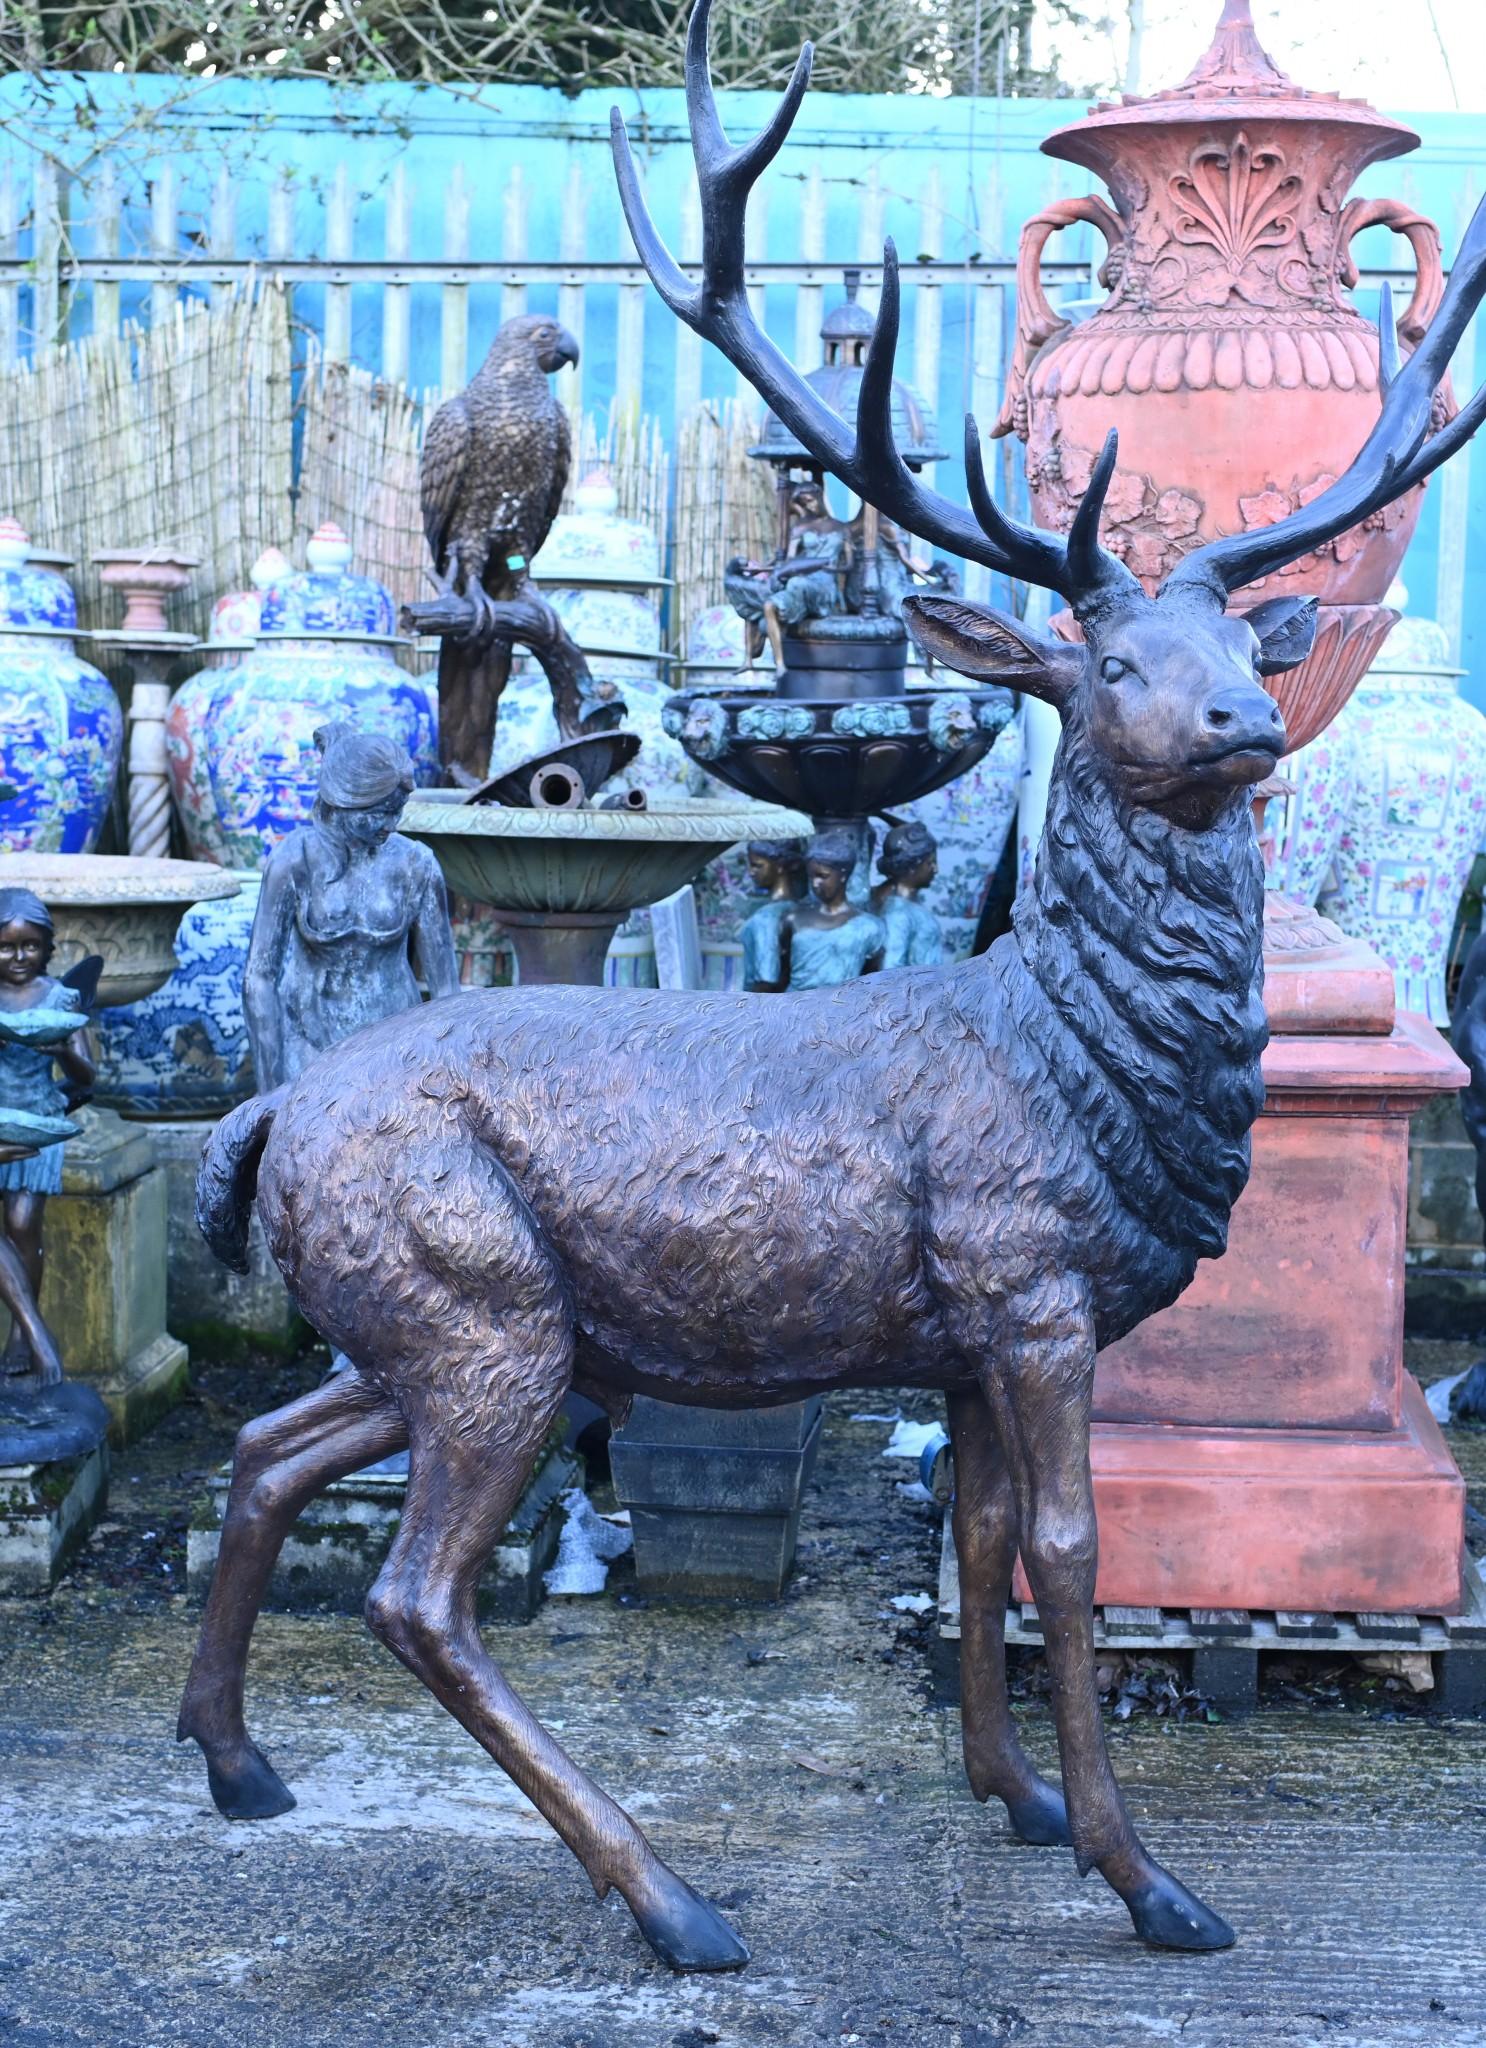 Wonderful bronze casting of a large stag
This is a big creature at seven feet tall - 213 CM
Reminds us of Landseers famous painting Monarch of the Glen which came to be a romantic symbol of Scotland's identity
You could just imagine this majestic